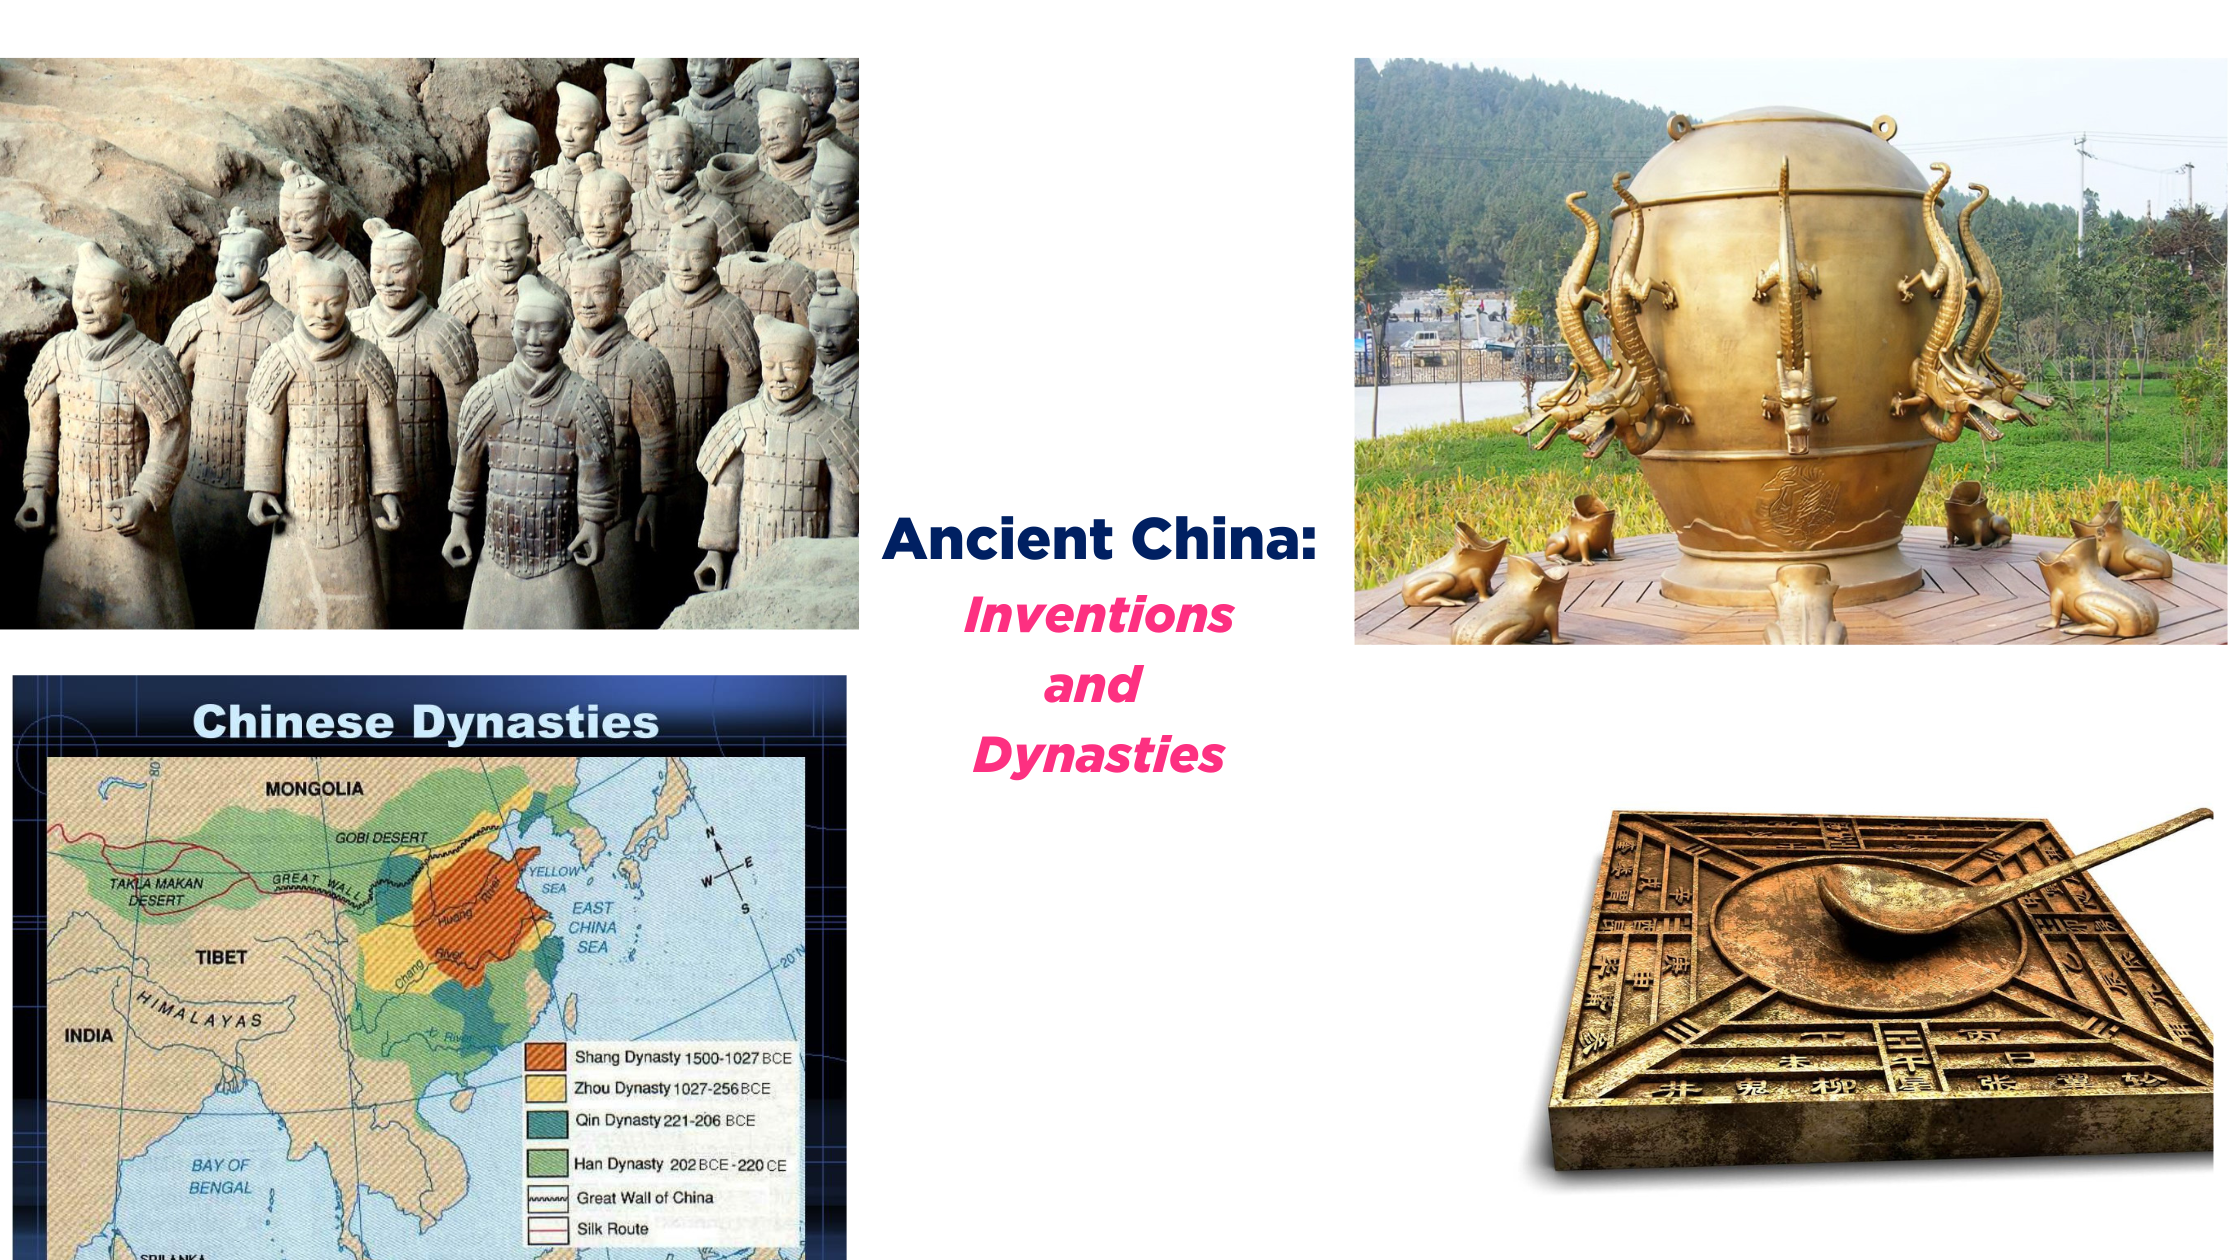 Ancient China: Inventions and Dynasties